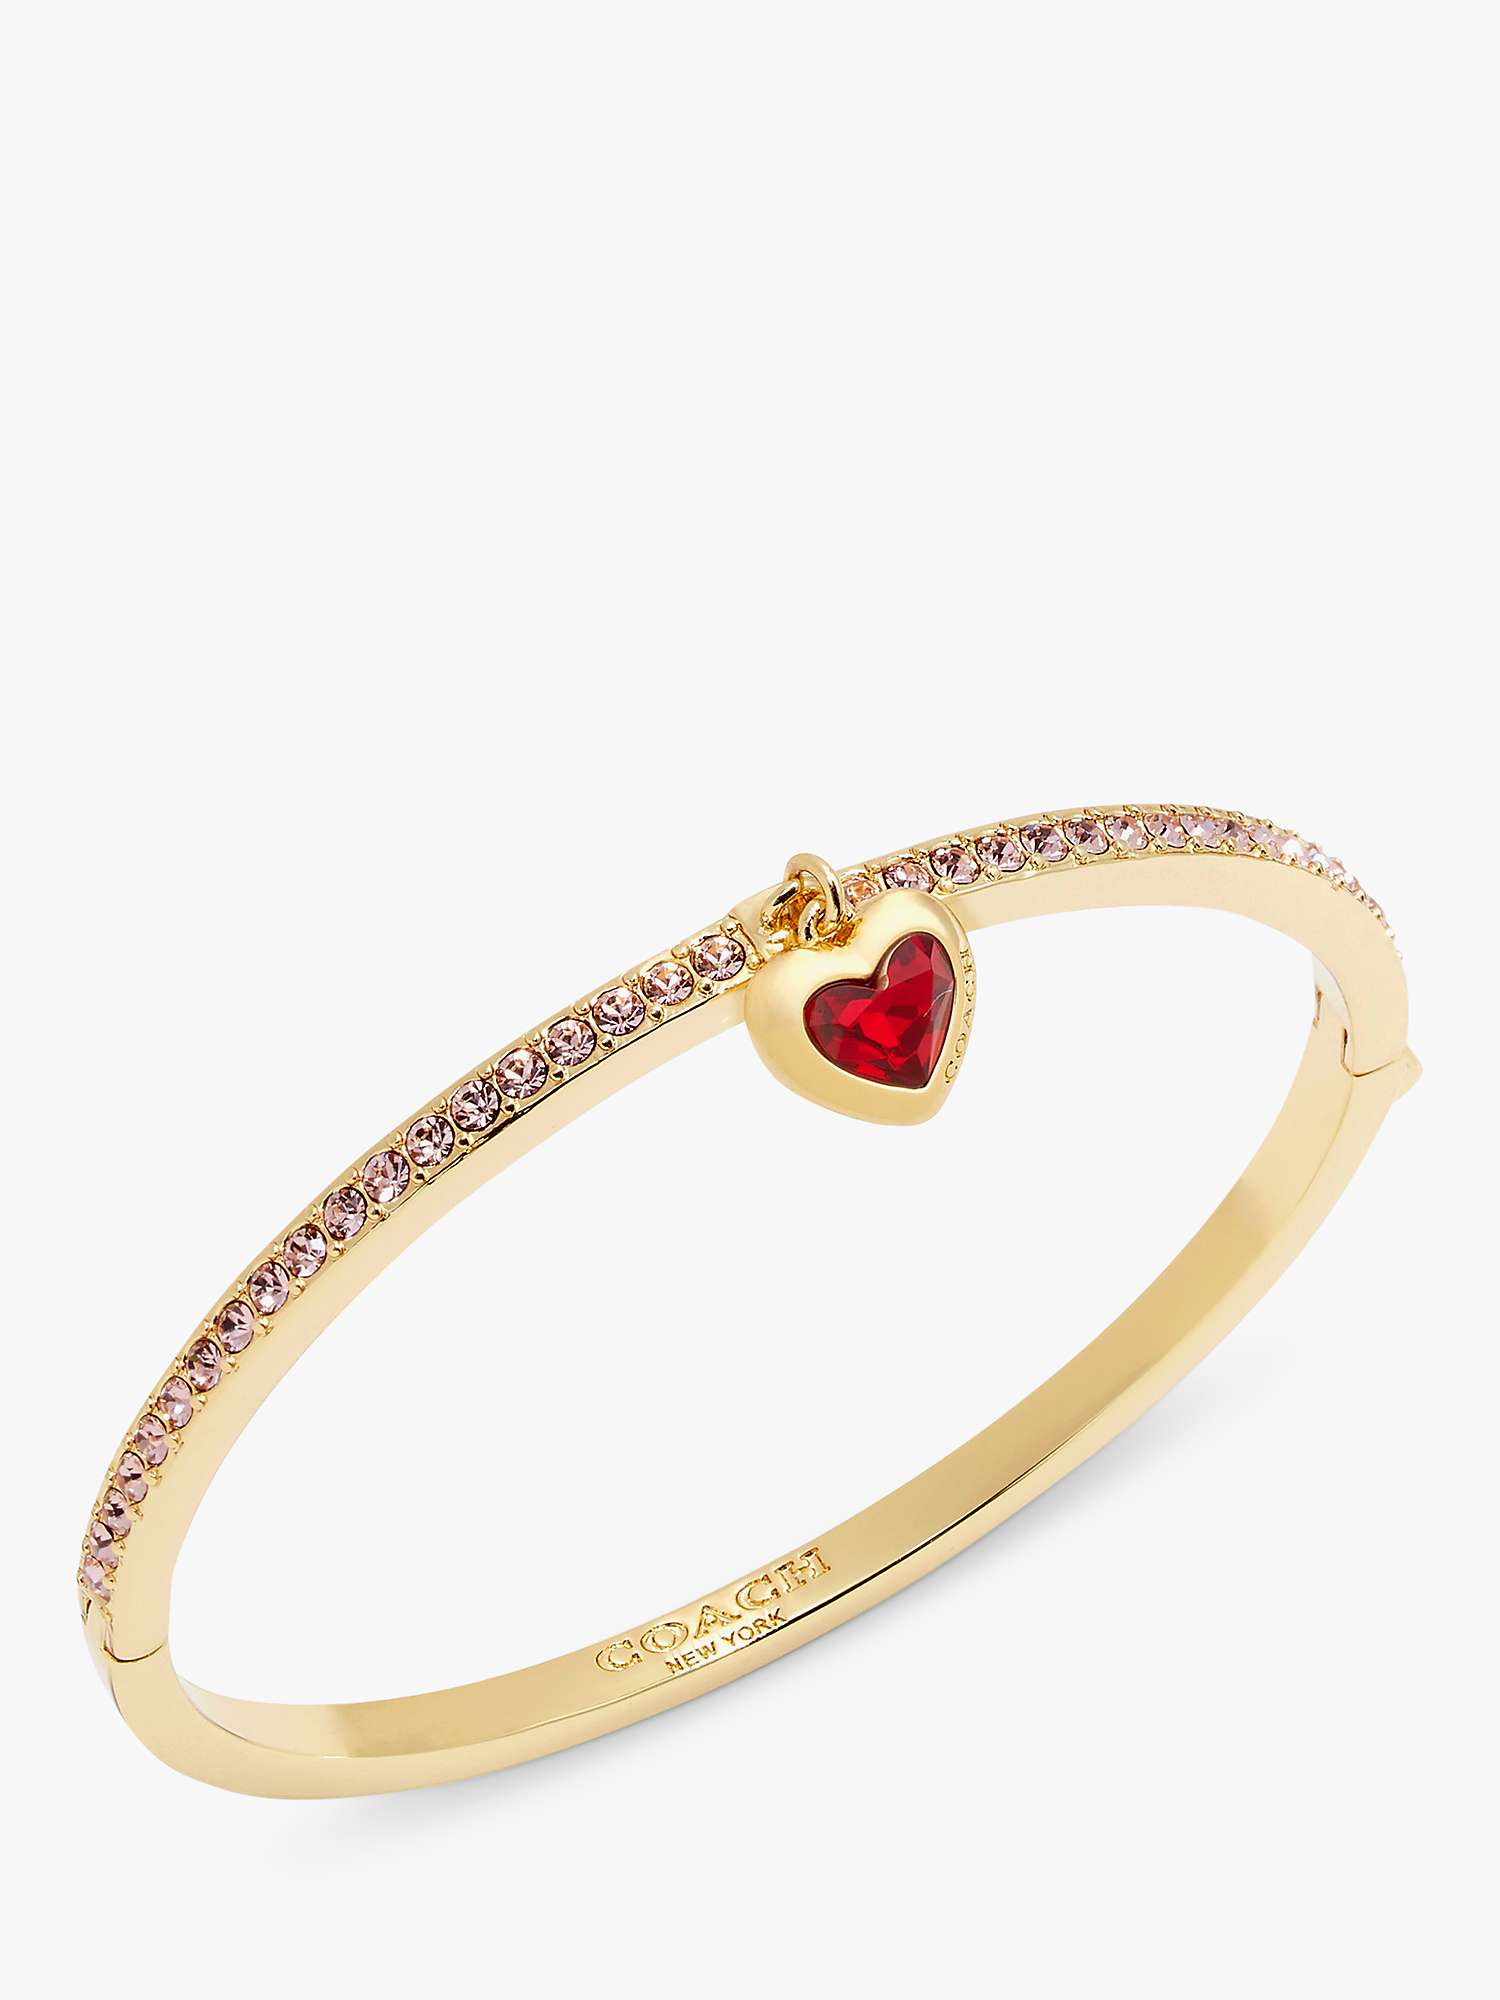 Buy Coach Crystal Heart Bangle, Gold/Red Online at johnlewis.com